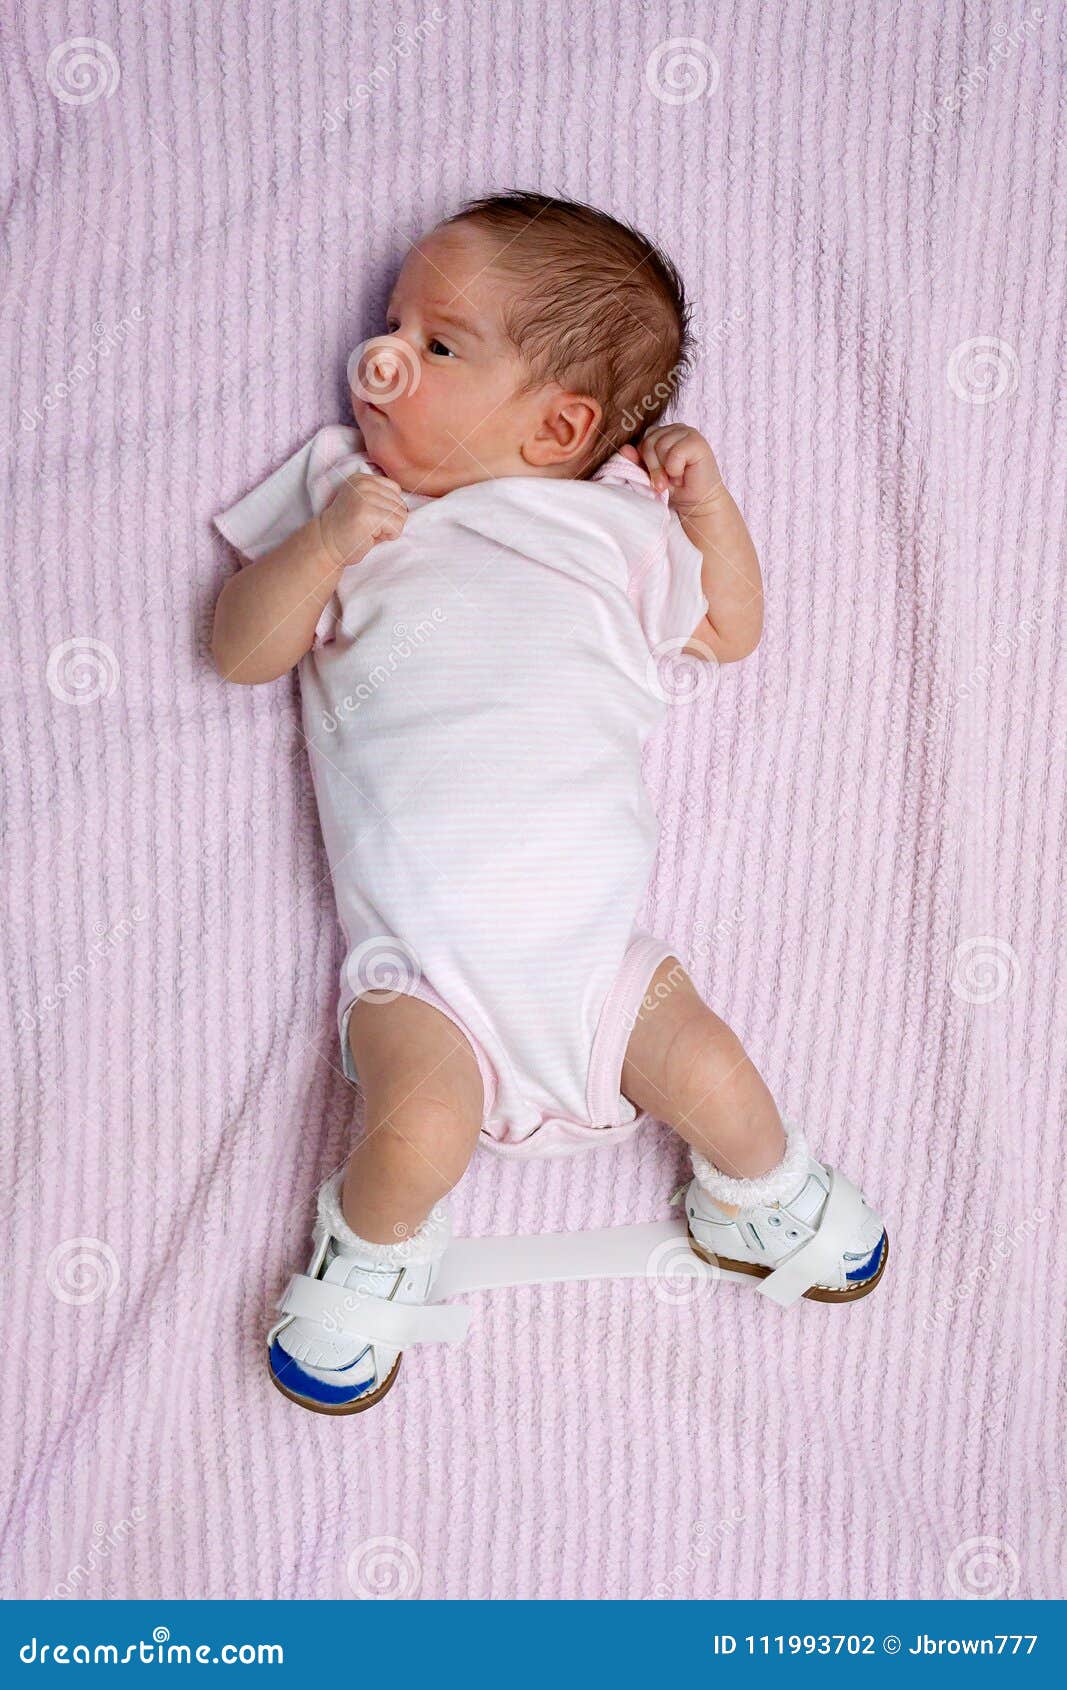 Newborn with Club Foot Wearing Orthopedic Shoes Stock Photo - Image of  congenital, footwear: 111993702